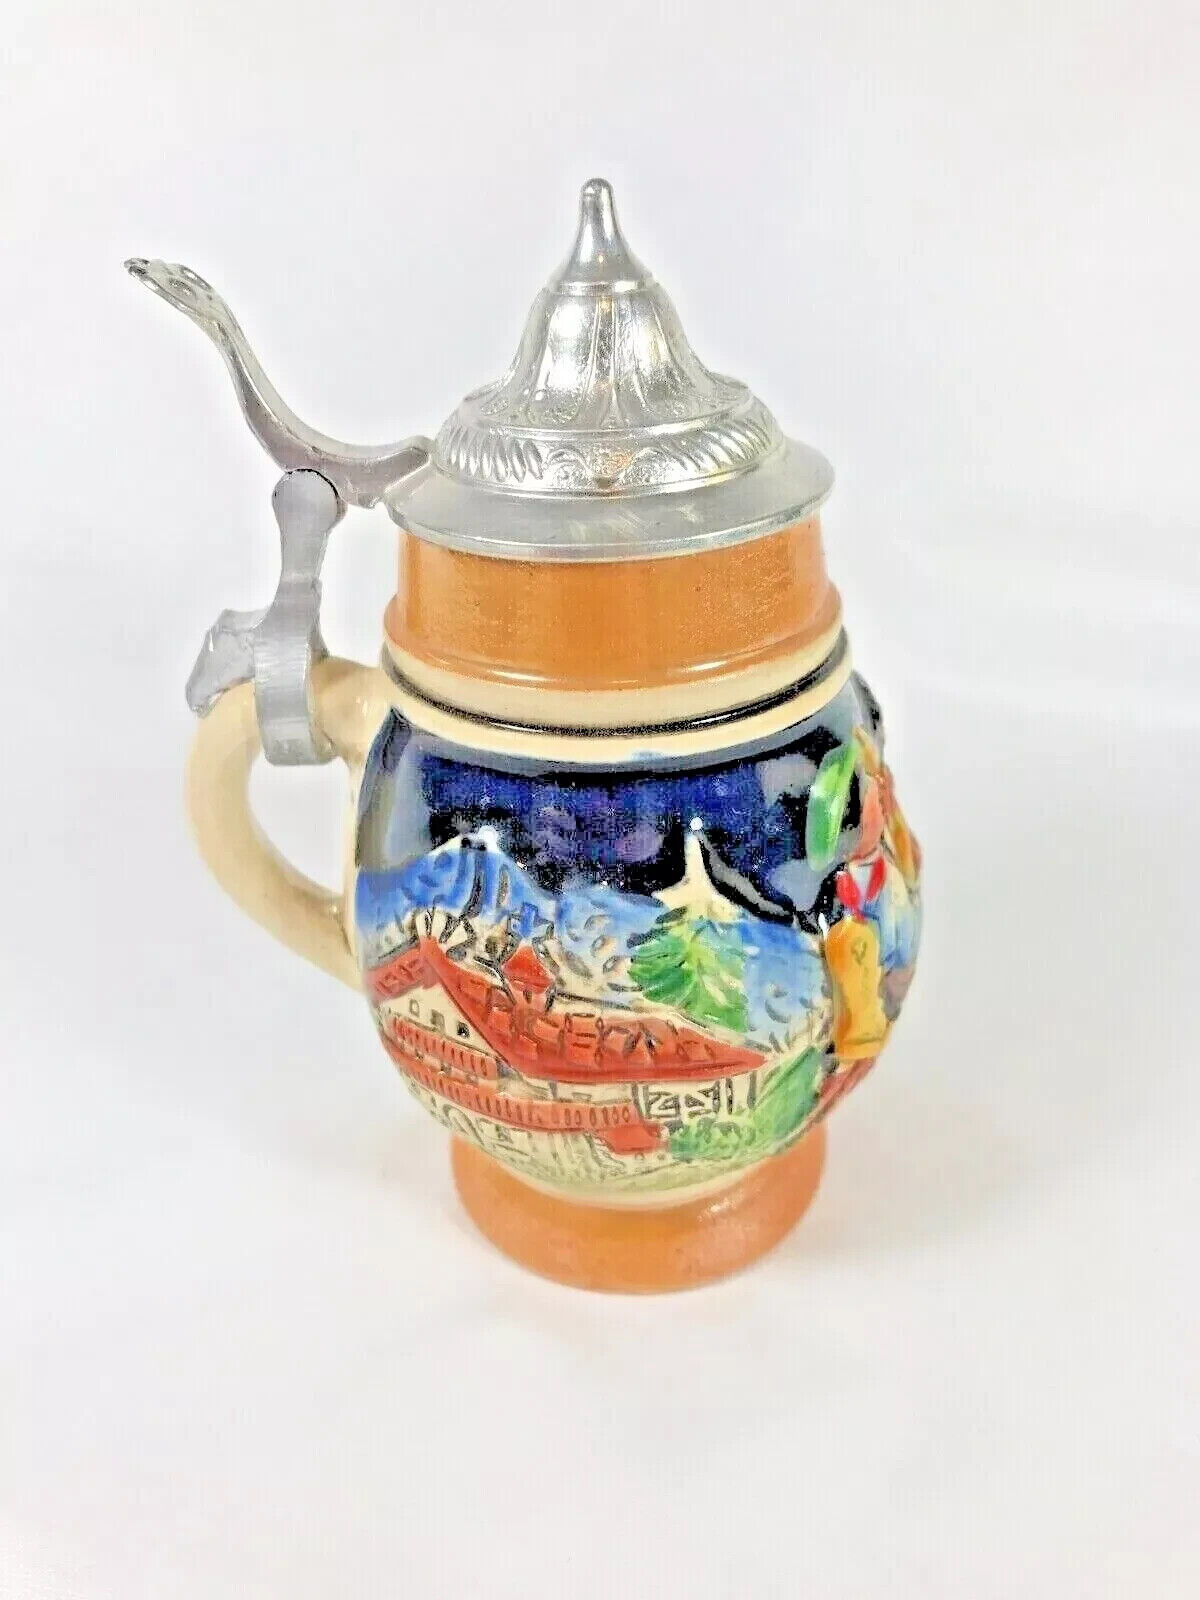 Vintage West German Beer Stein Made in Western Germany E Bay Exclusive Promotion